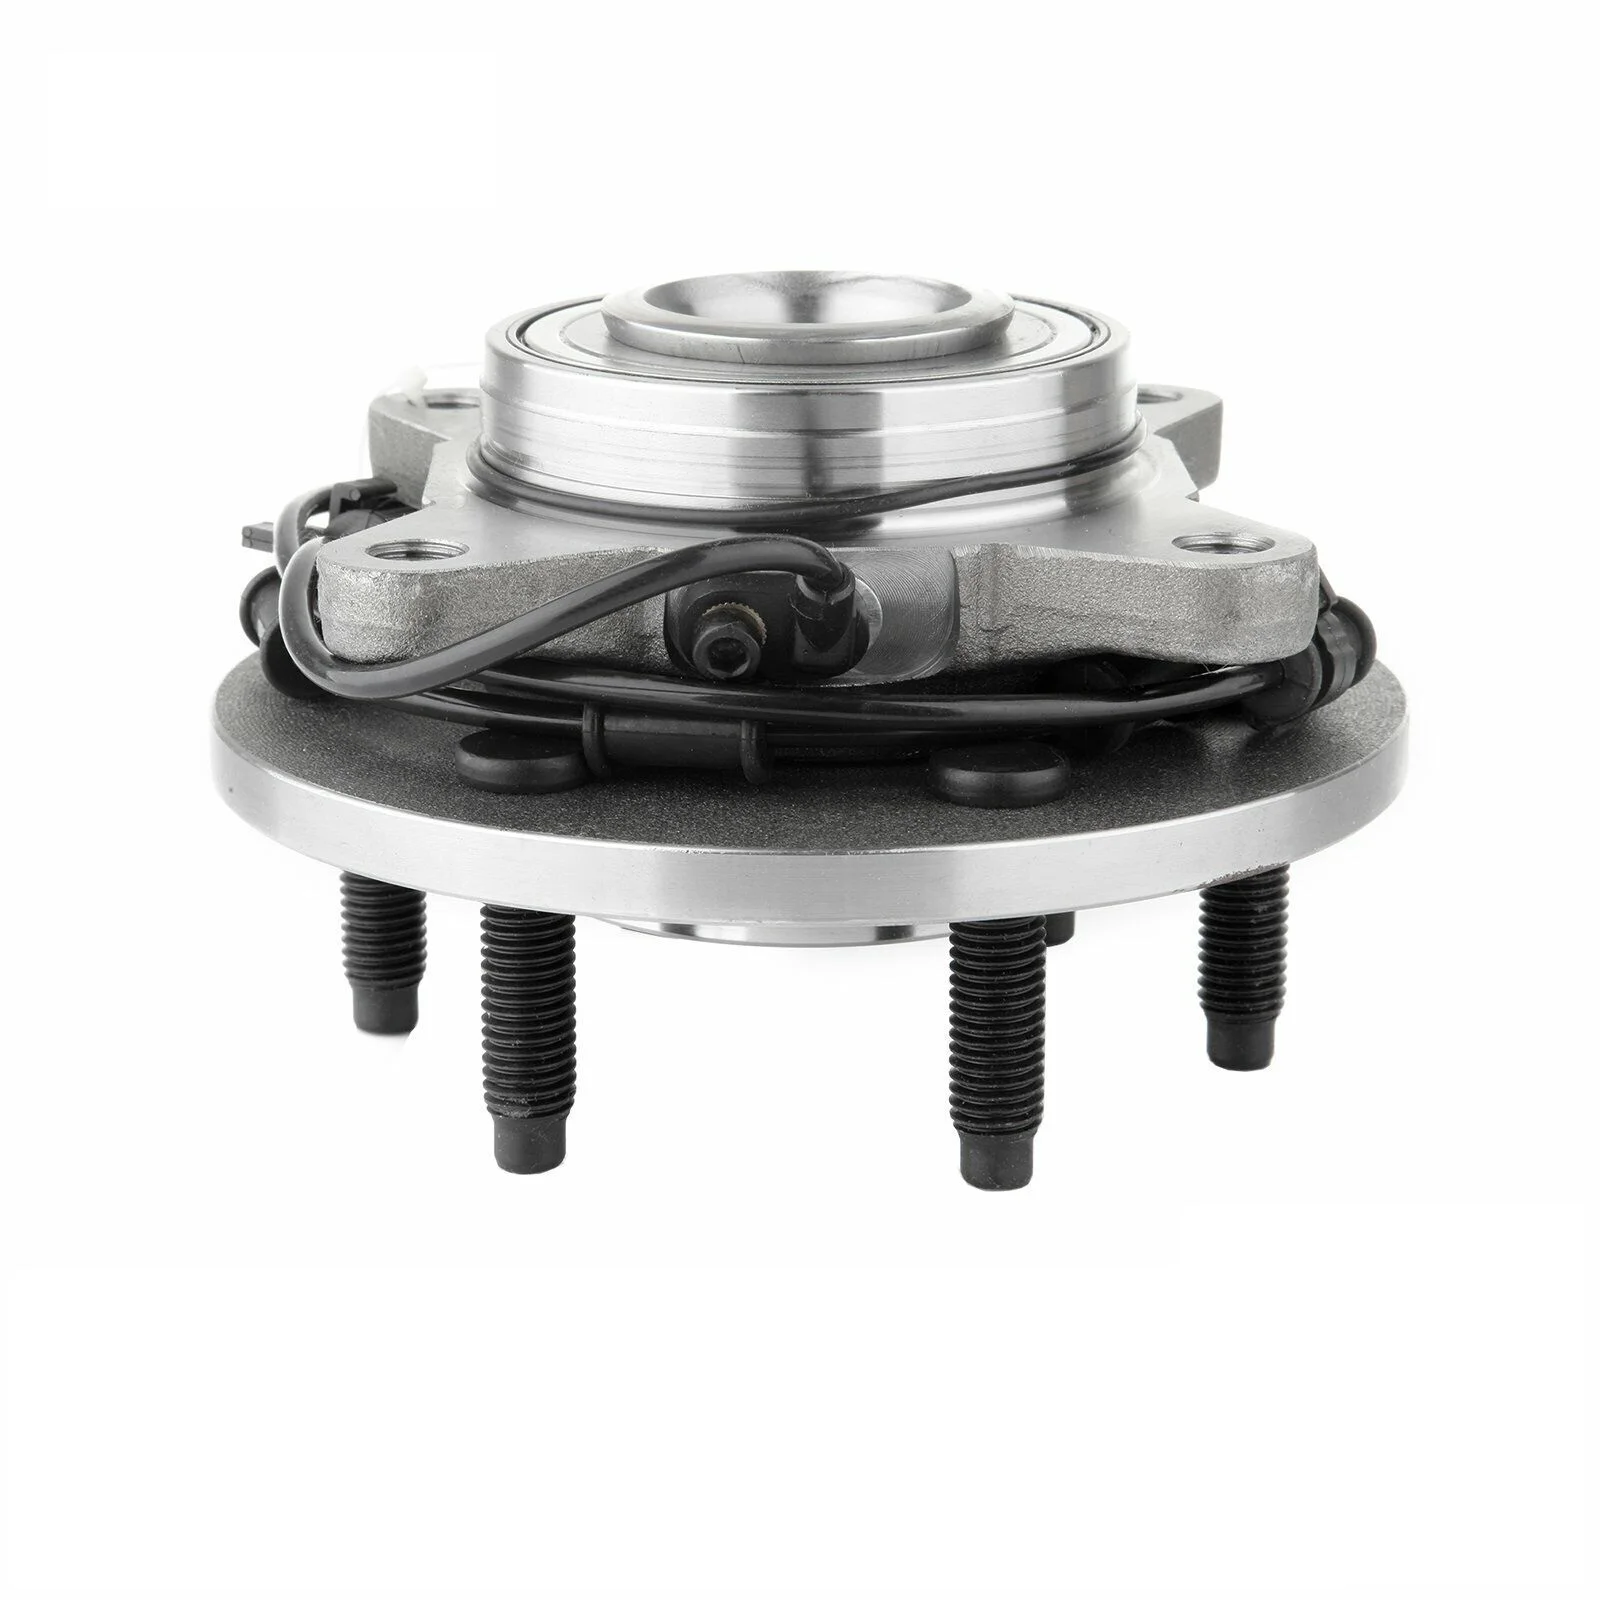 

2PCS 515042 Front Wheel Hub Bearing For 03-2006 Ford Expedition Lincoln Navigator 2WD